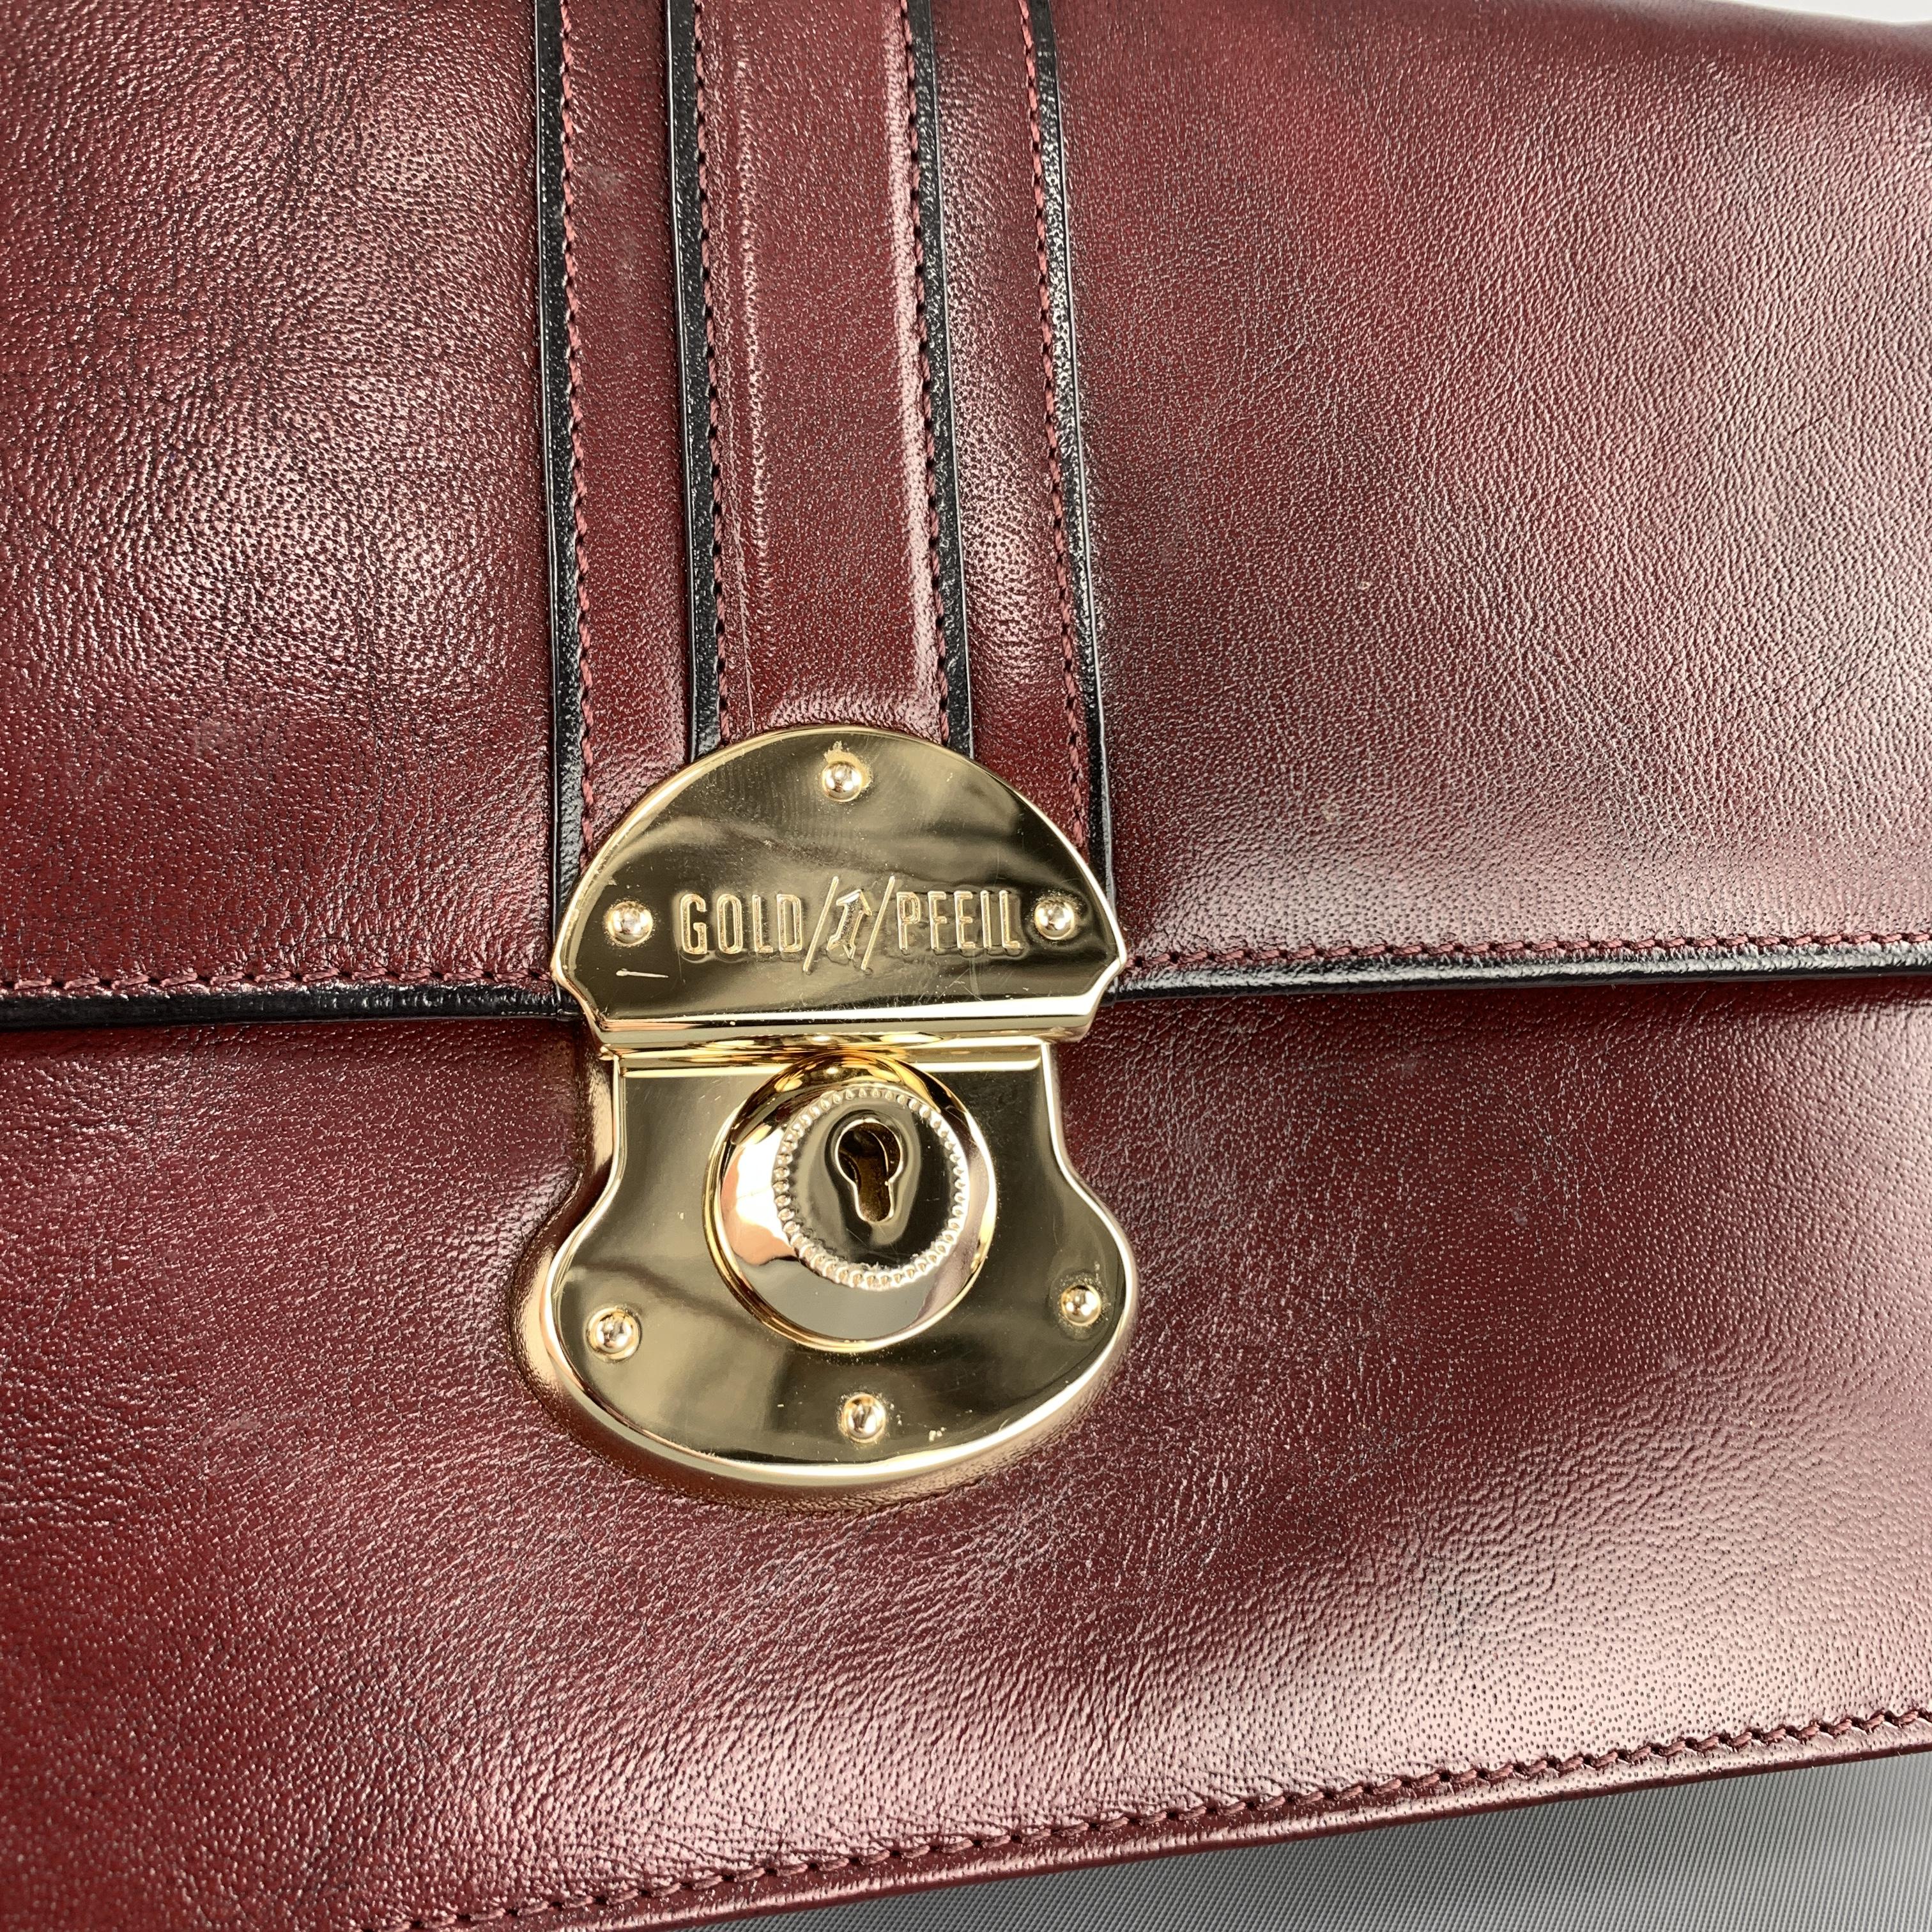 GOLDPFEIL mini briefcase clutch comes in burgundy leather with a flap top, gold tone lock closure, retractable side strap, and interior storage. 

Excellent Pre-Owned Condition.

Measurements:

Length: 9.75 in.
Width: 2 in.
Height: 6.5 in.